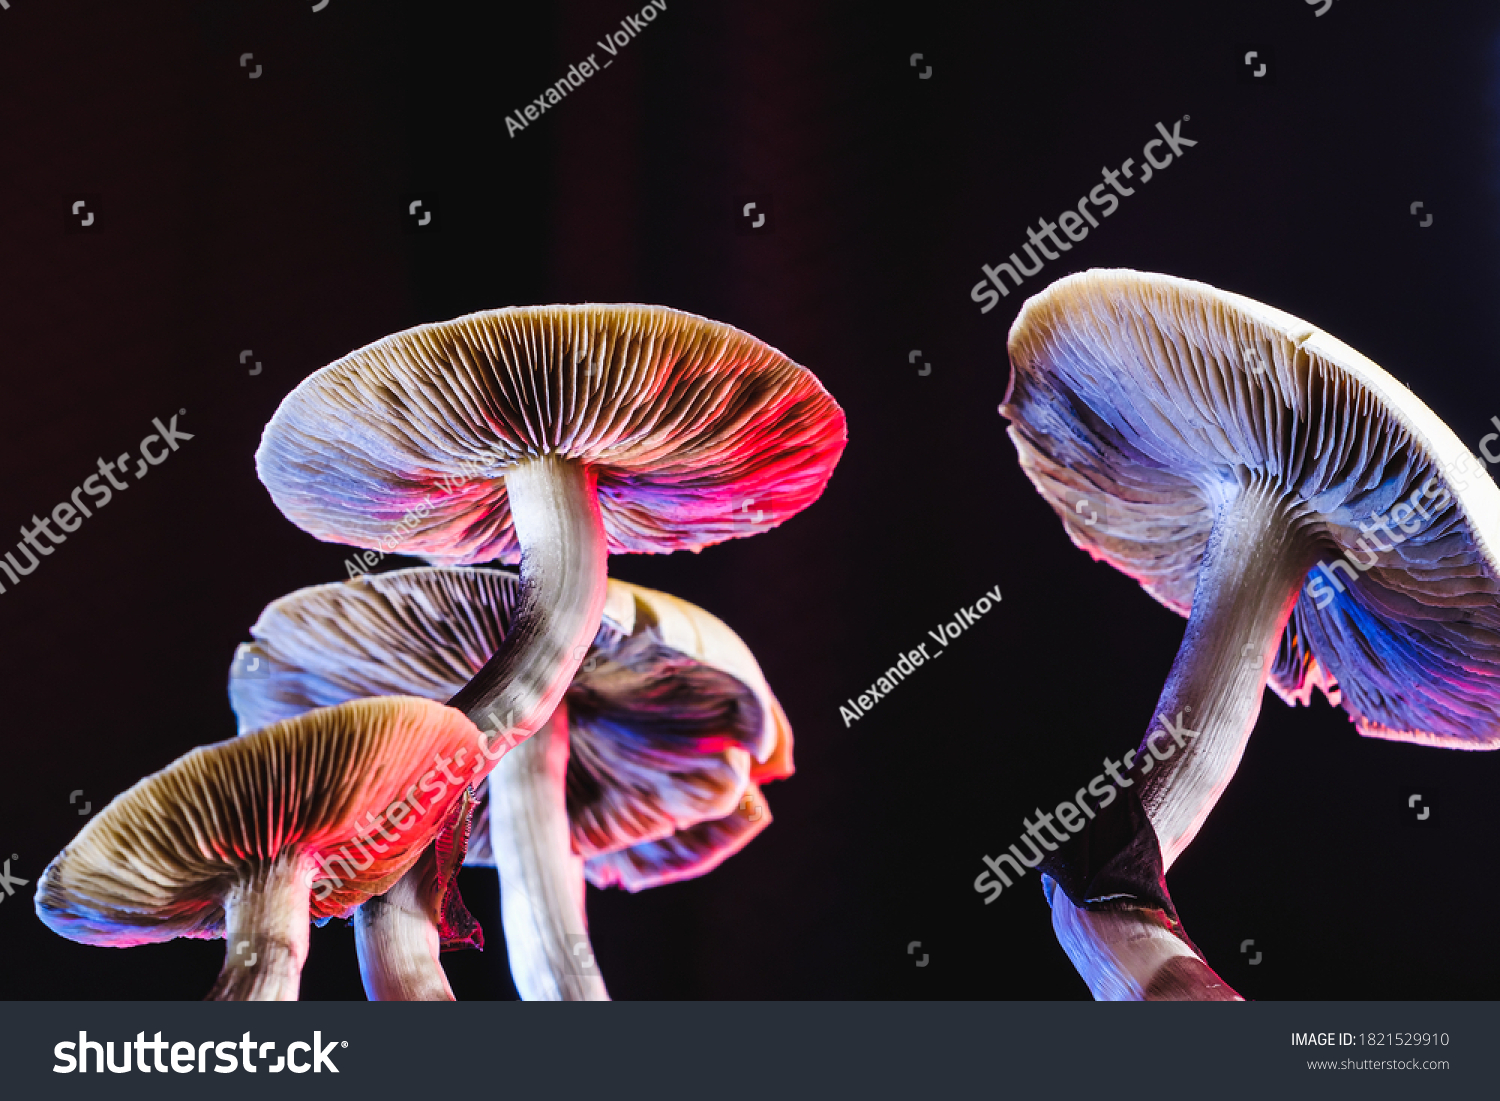 The Mexican magic mushroom is a psilocybe cubensis, whose main active elements are psilocybin and psilocin - Mexican Psilocybe Cubensis. An adult mushroom raining spores #1821529910